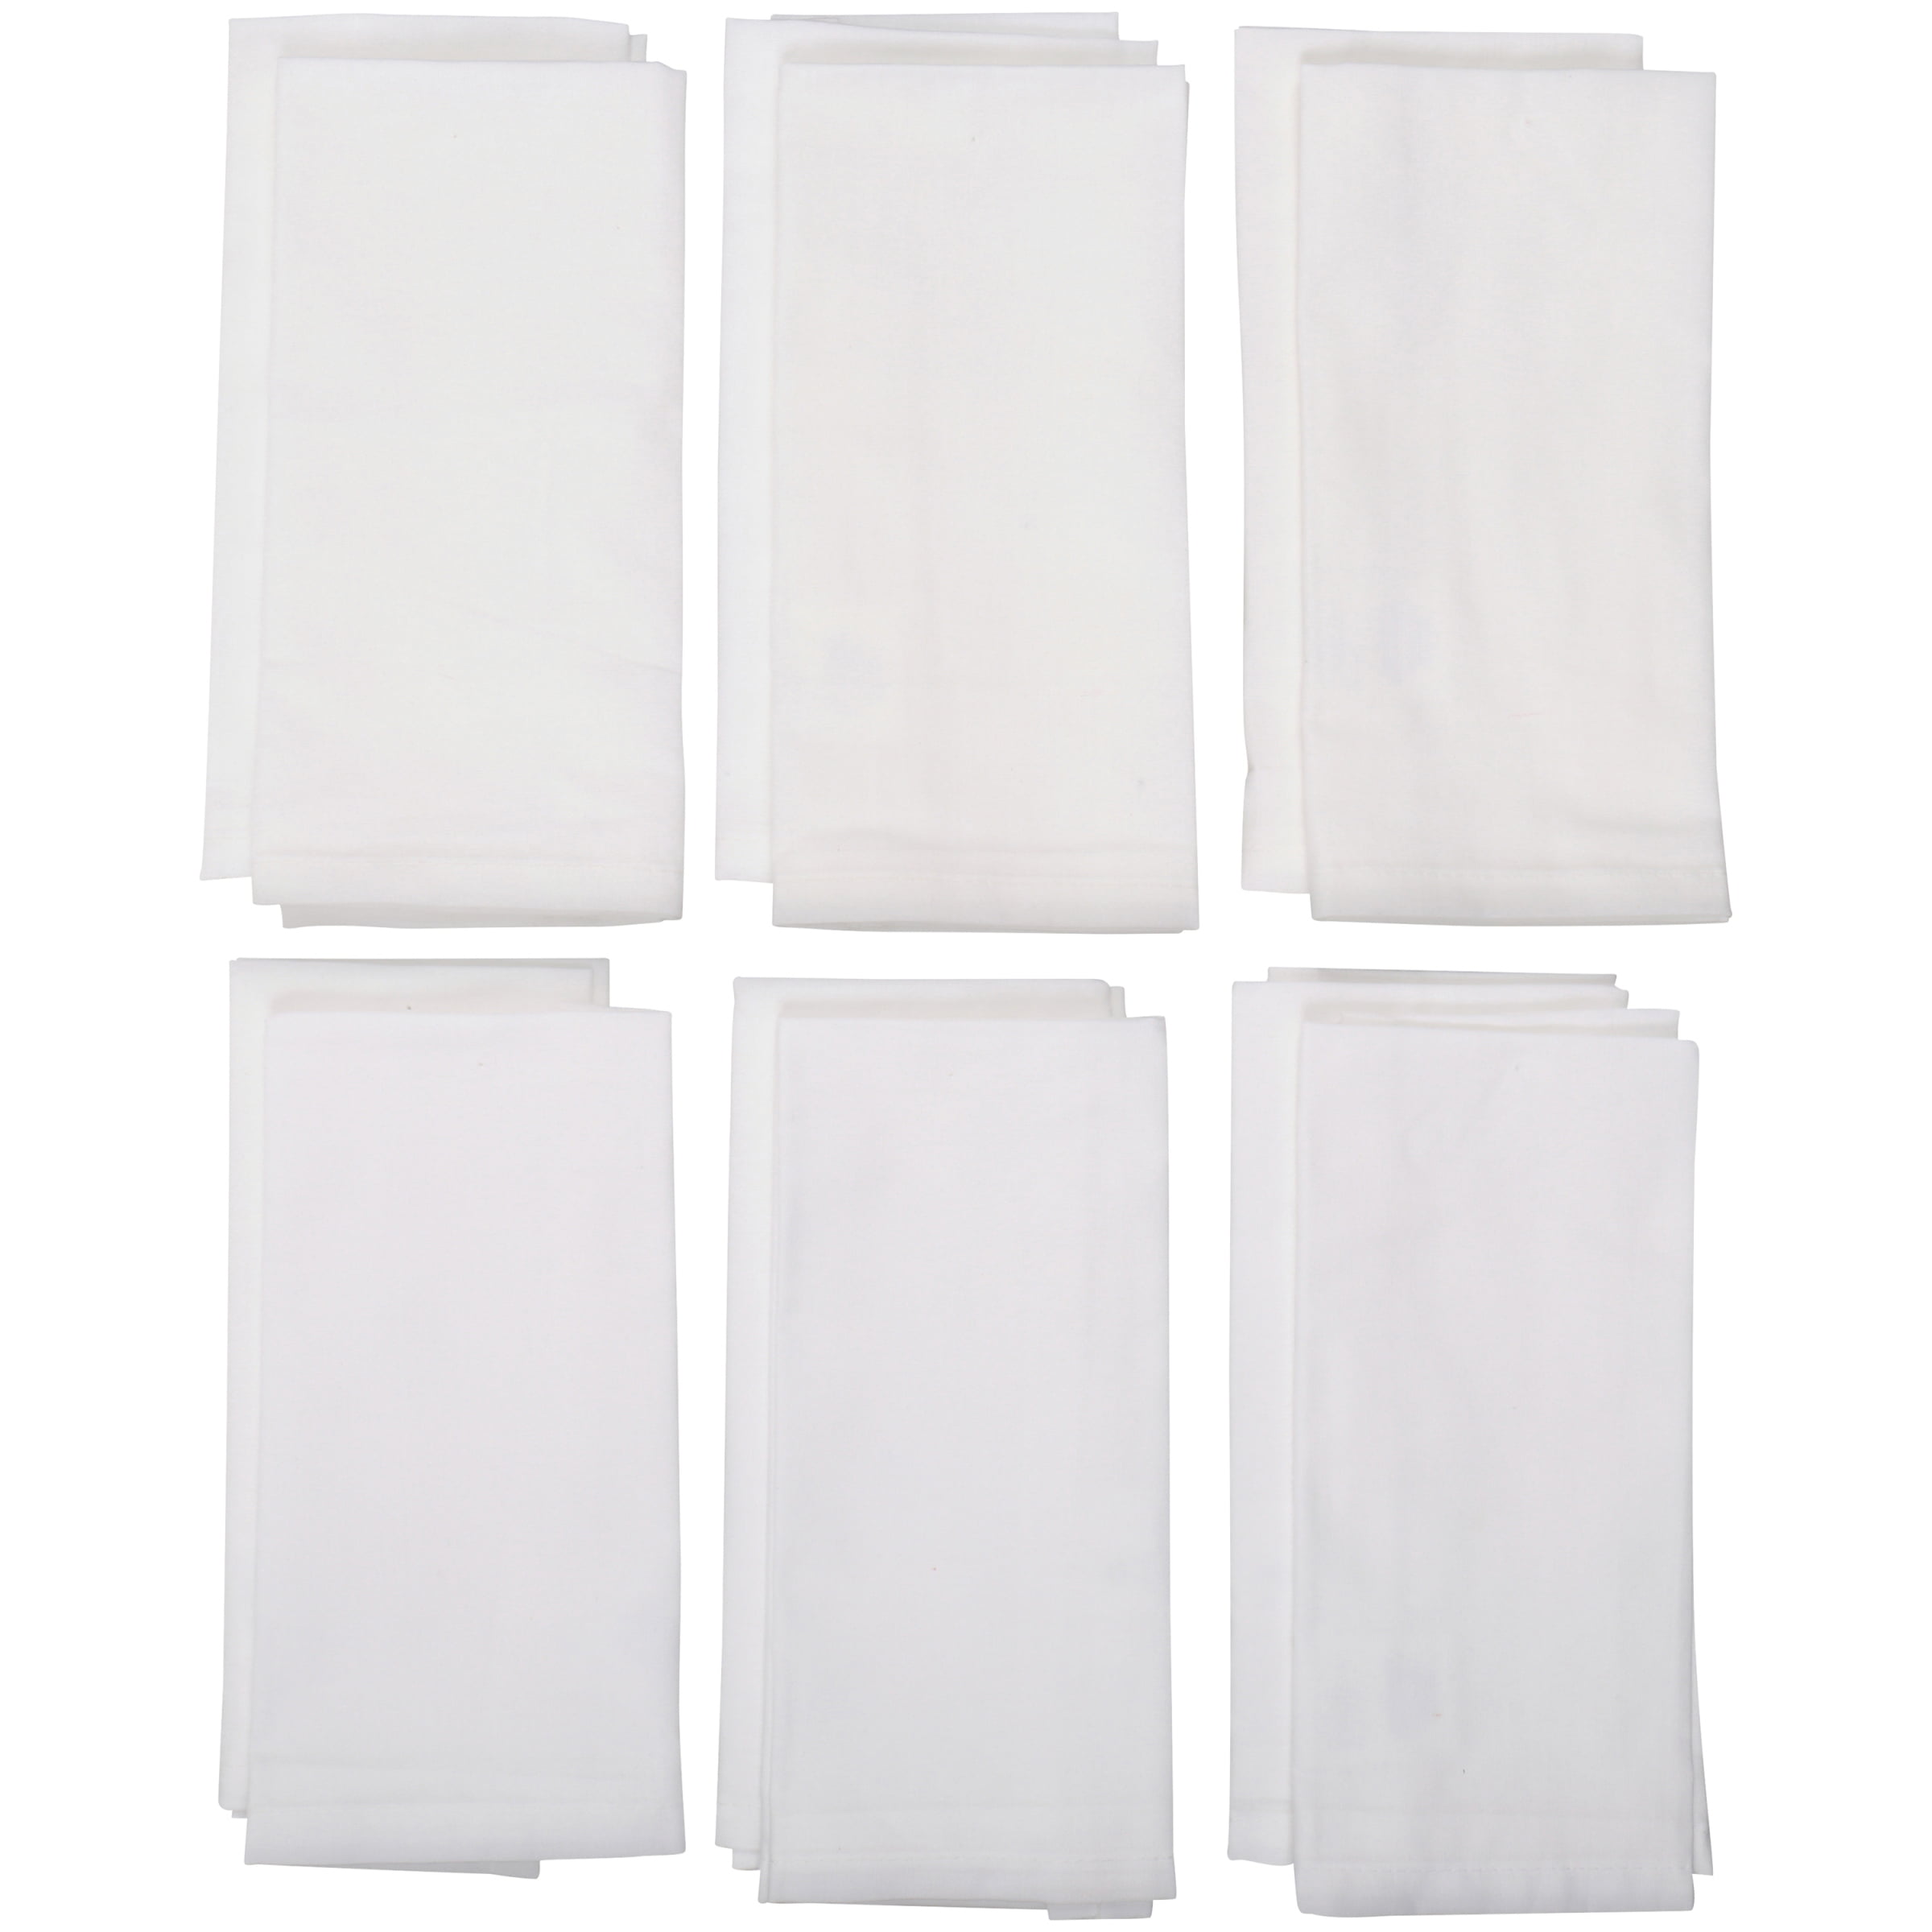 J Banquet 18” x 18” Perfect for Events Durable Washable & Reusable Fabric Napkin with Hemmed Edges Adler Cloth Dinner Table Napkins Hotel & Home Use WHITE Restaurant 12 Pack Luxuriously Soft & Hotel Quality Poly-Cotton Napkins